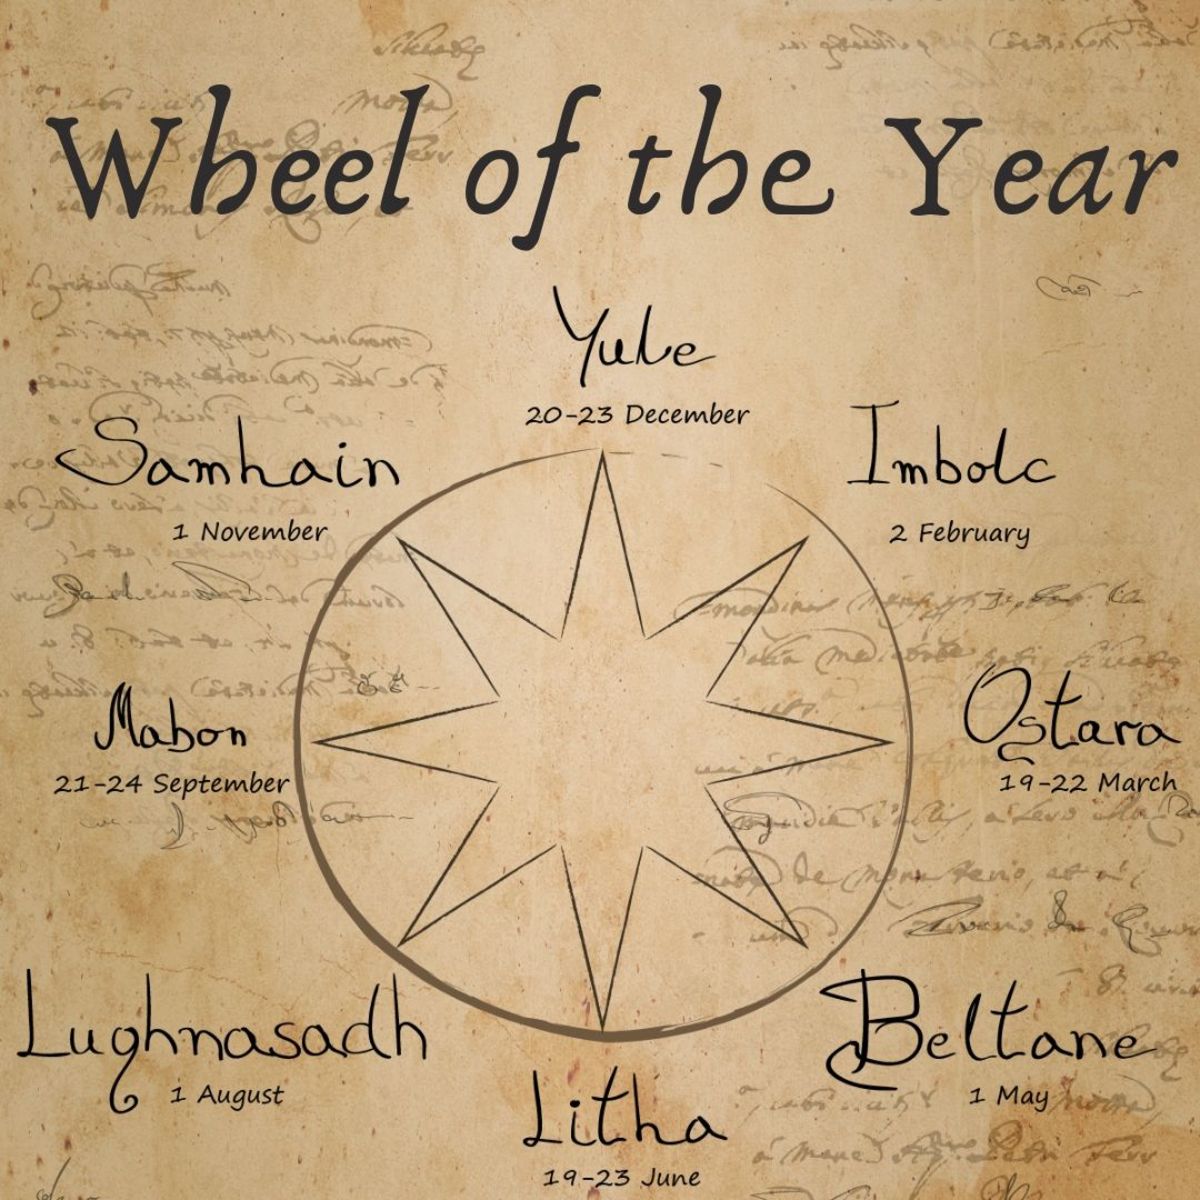 Pagan Holiday Calendar 2022 Wheel Of The Year: The Eight Pagan Holidays Explained - Exemplore